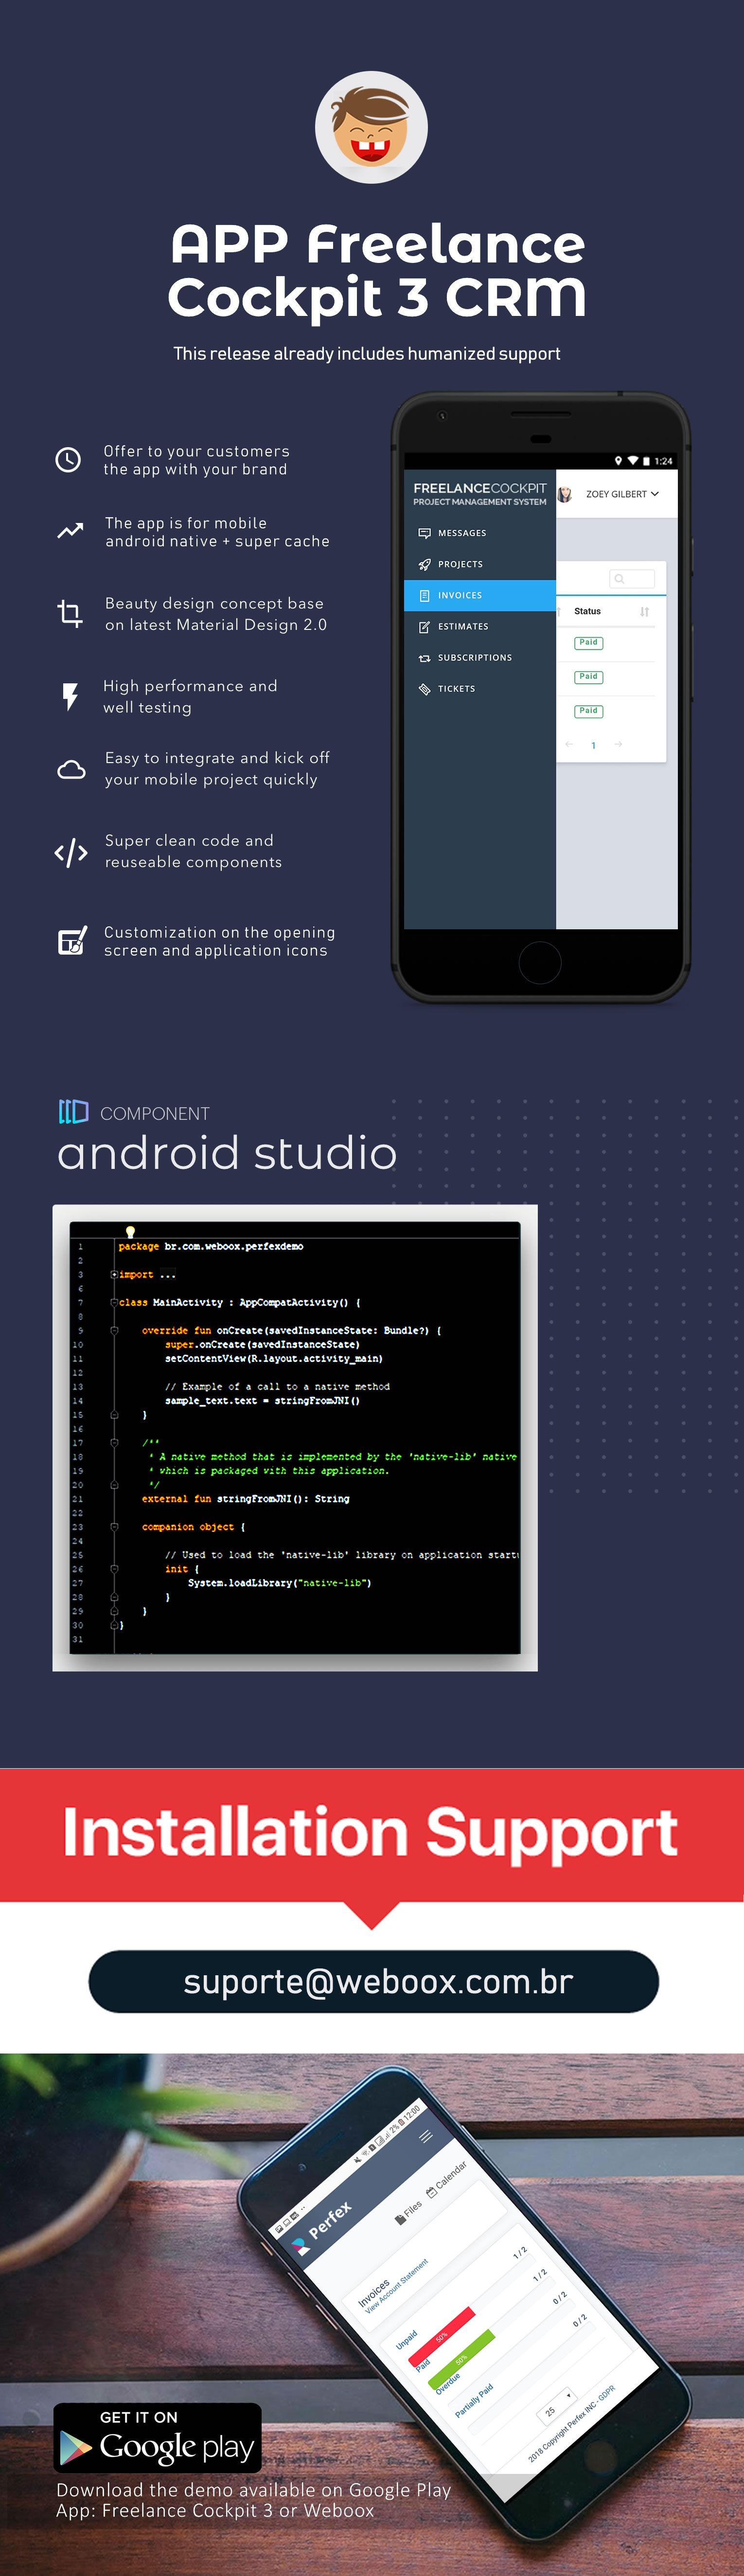 Weboox Convert - Freelance Cockpit 3 to app Android - 3